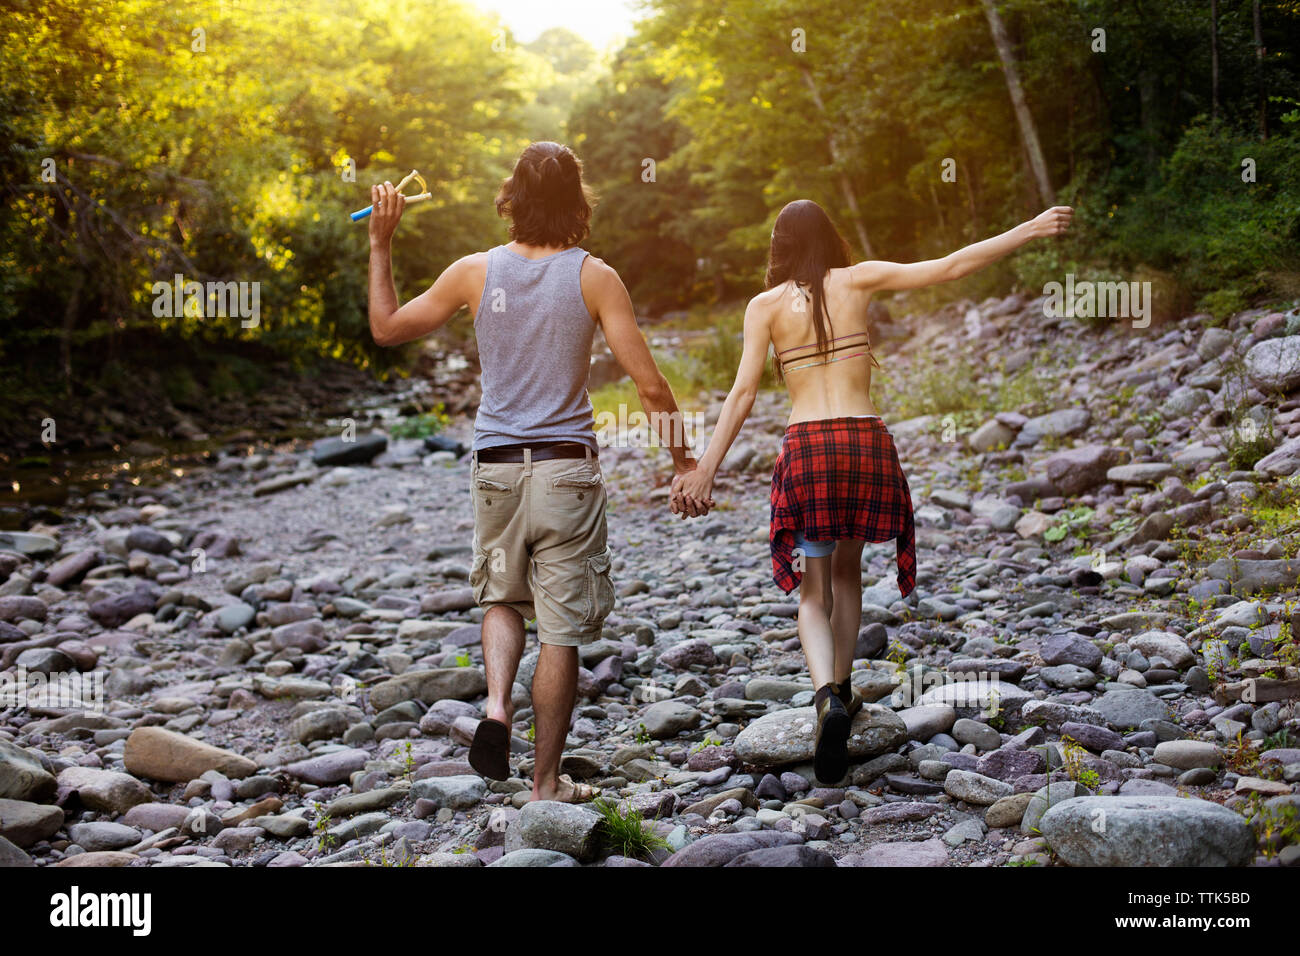 Rear view of couple holding hands while walking on rocks in forest Stock Photo